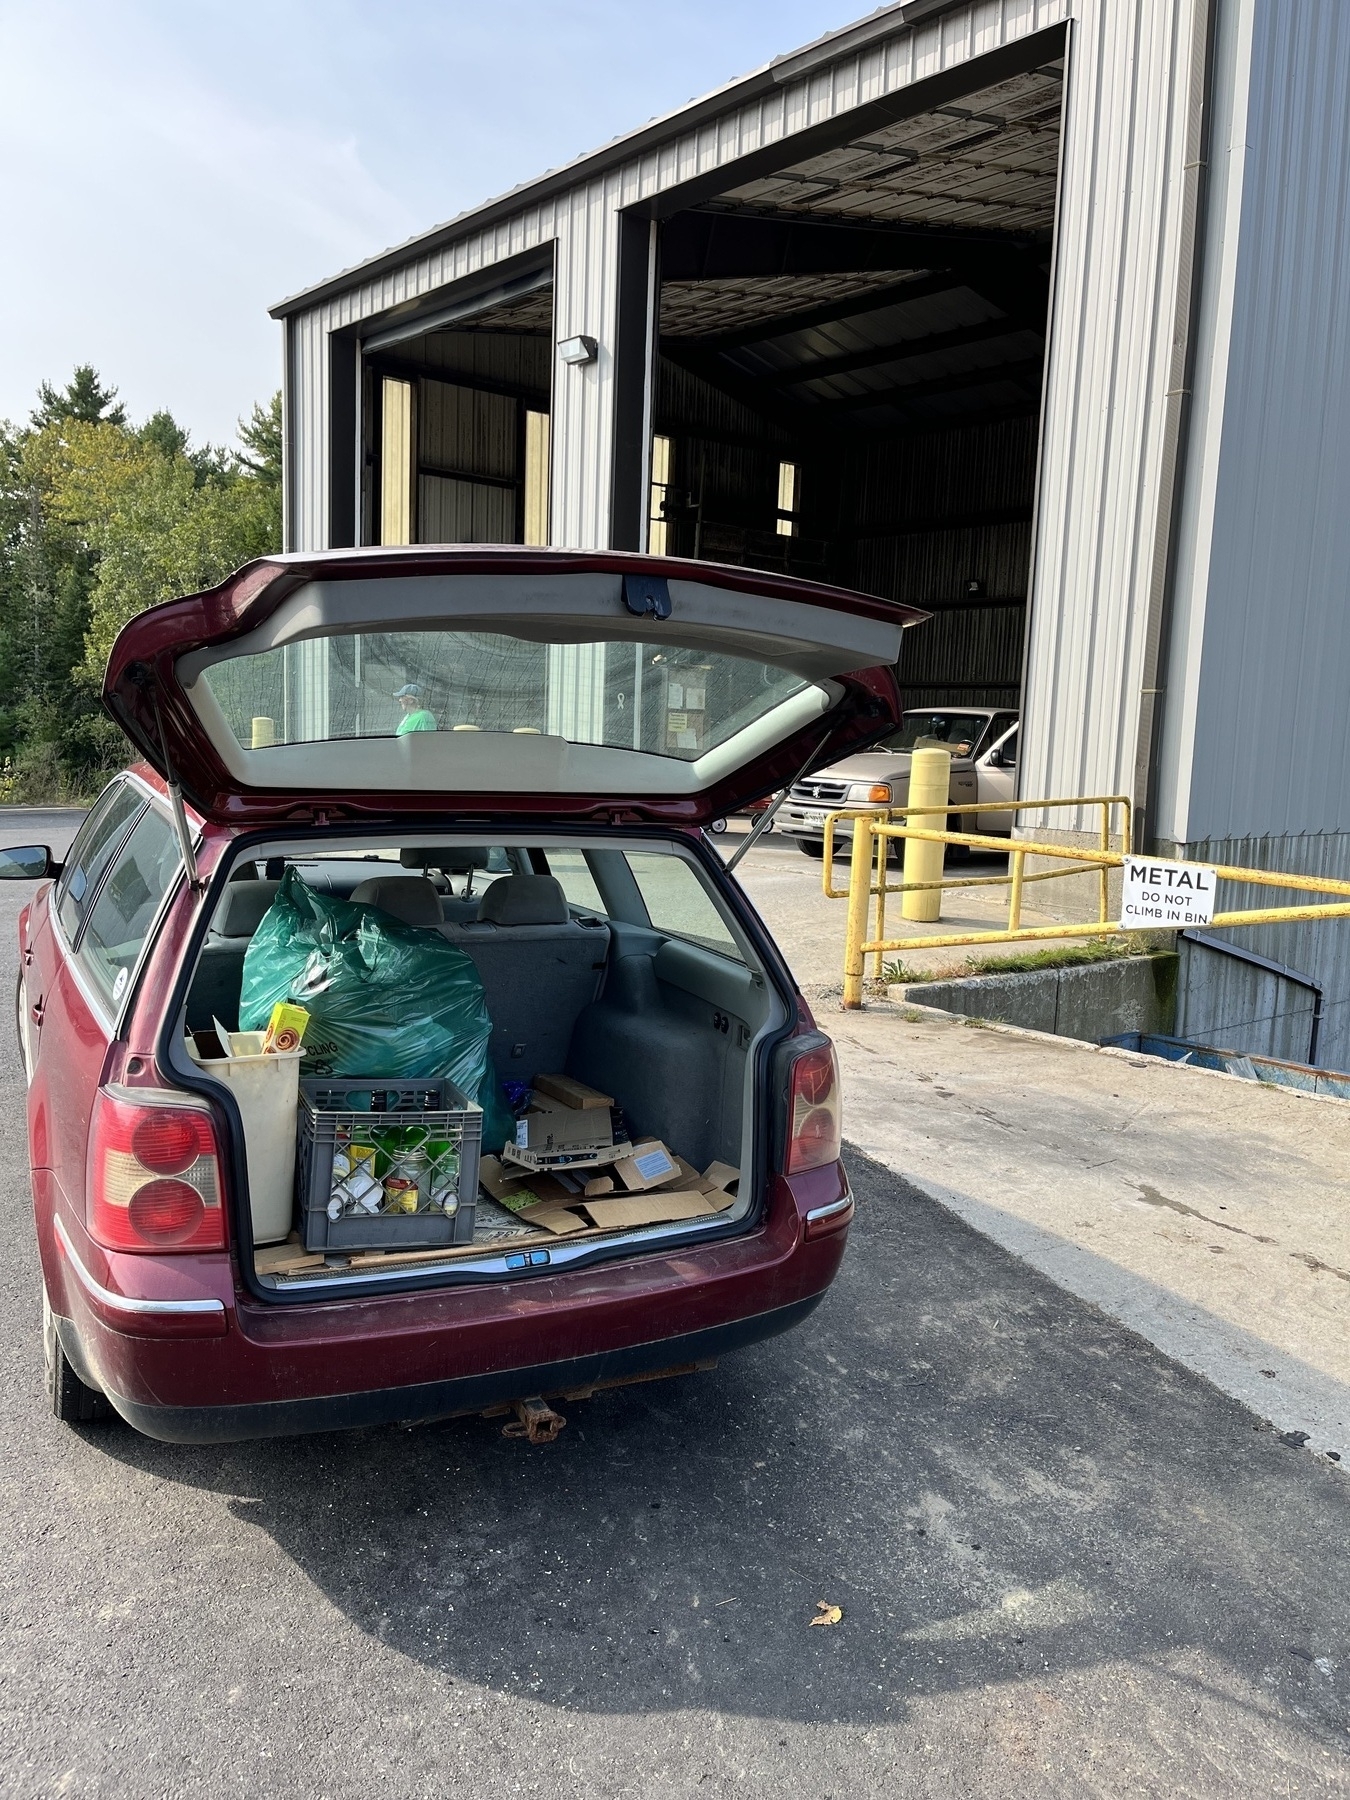 View of open back of station wagon filled with trash and recycling in front of large metal building. 